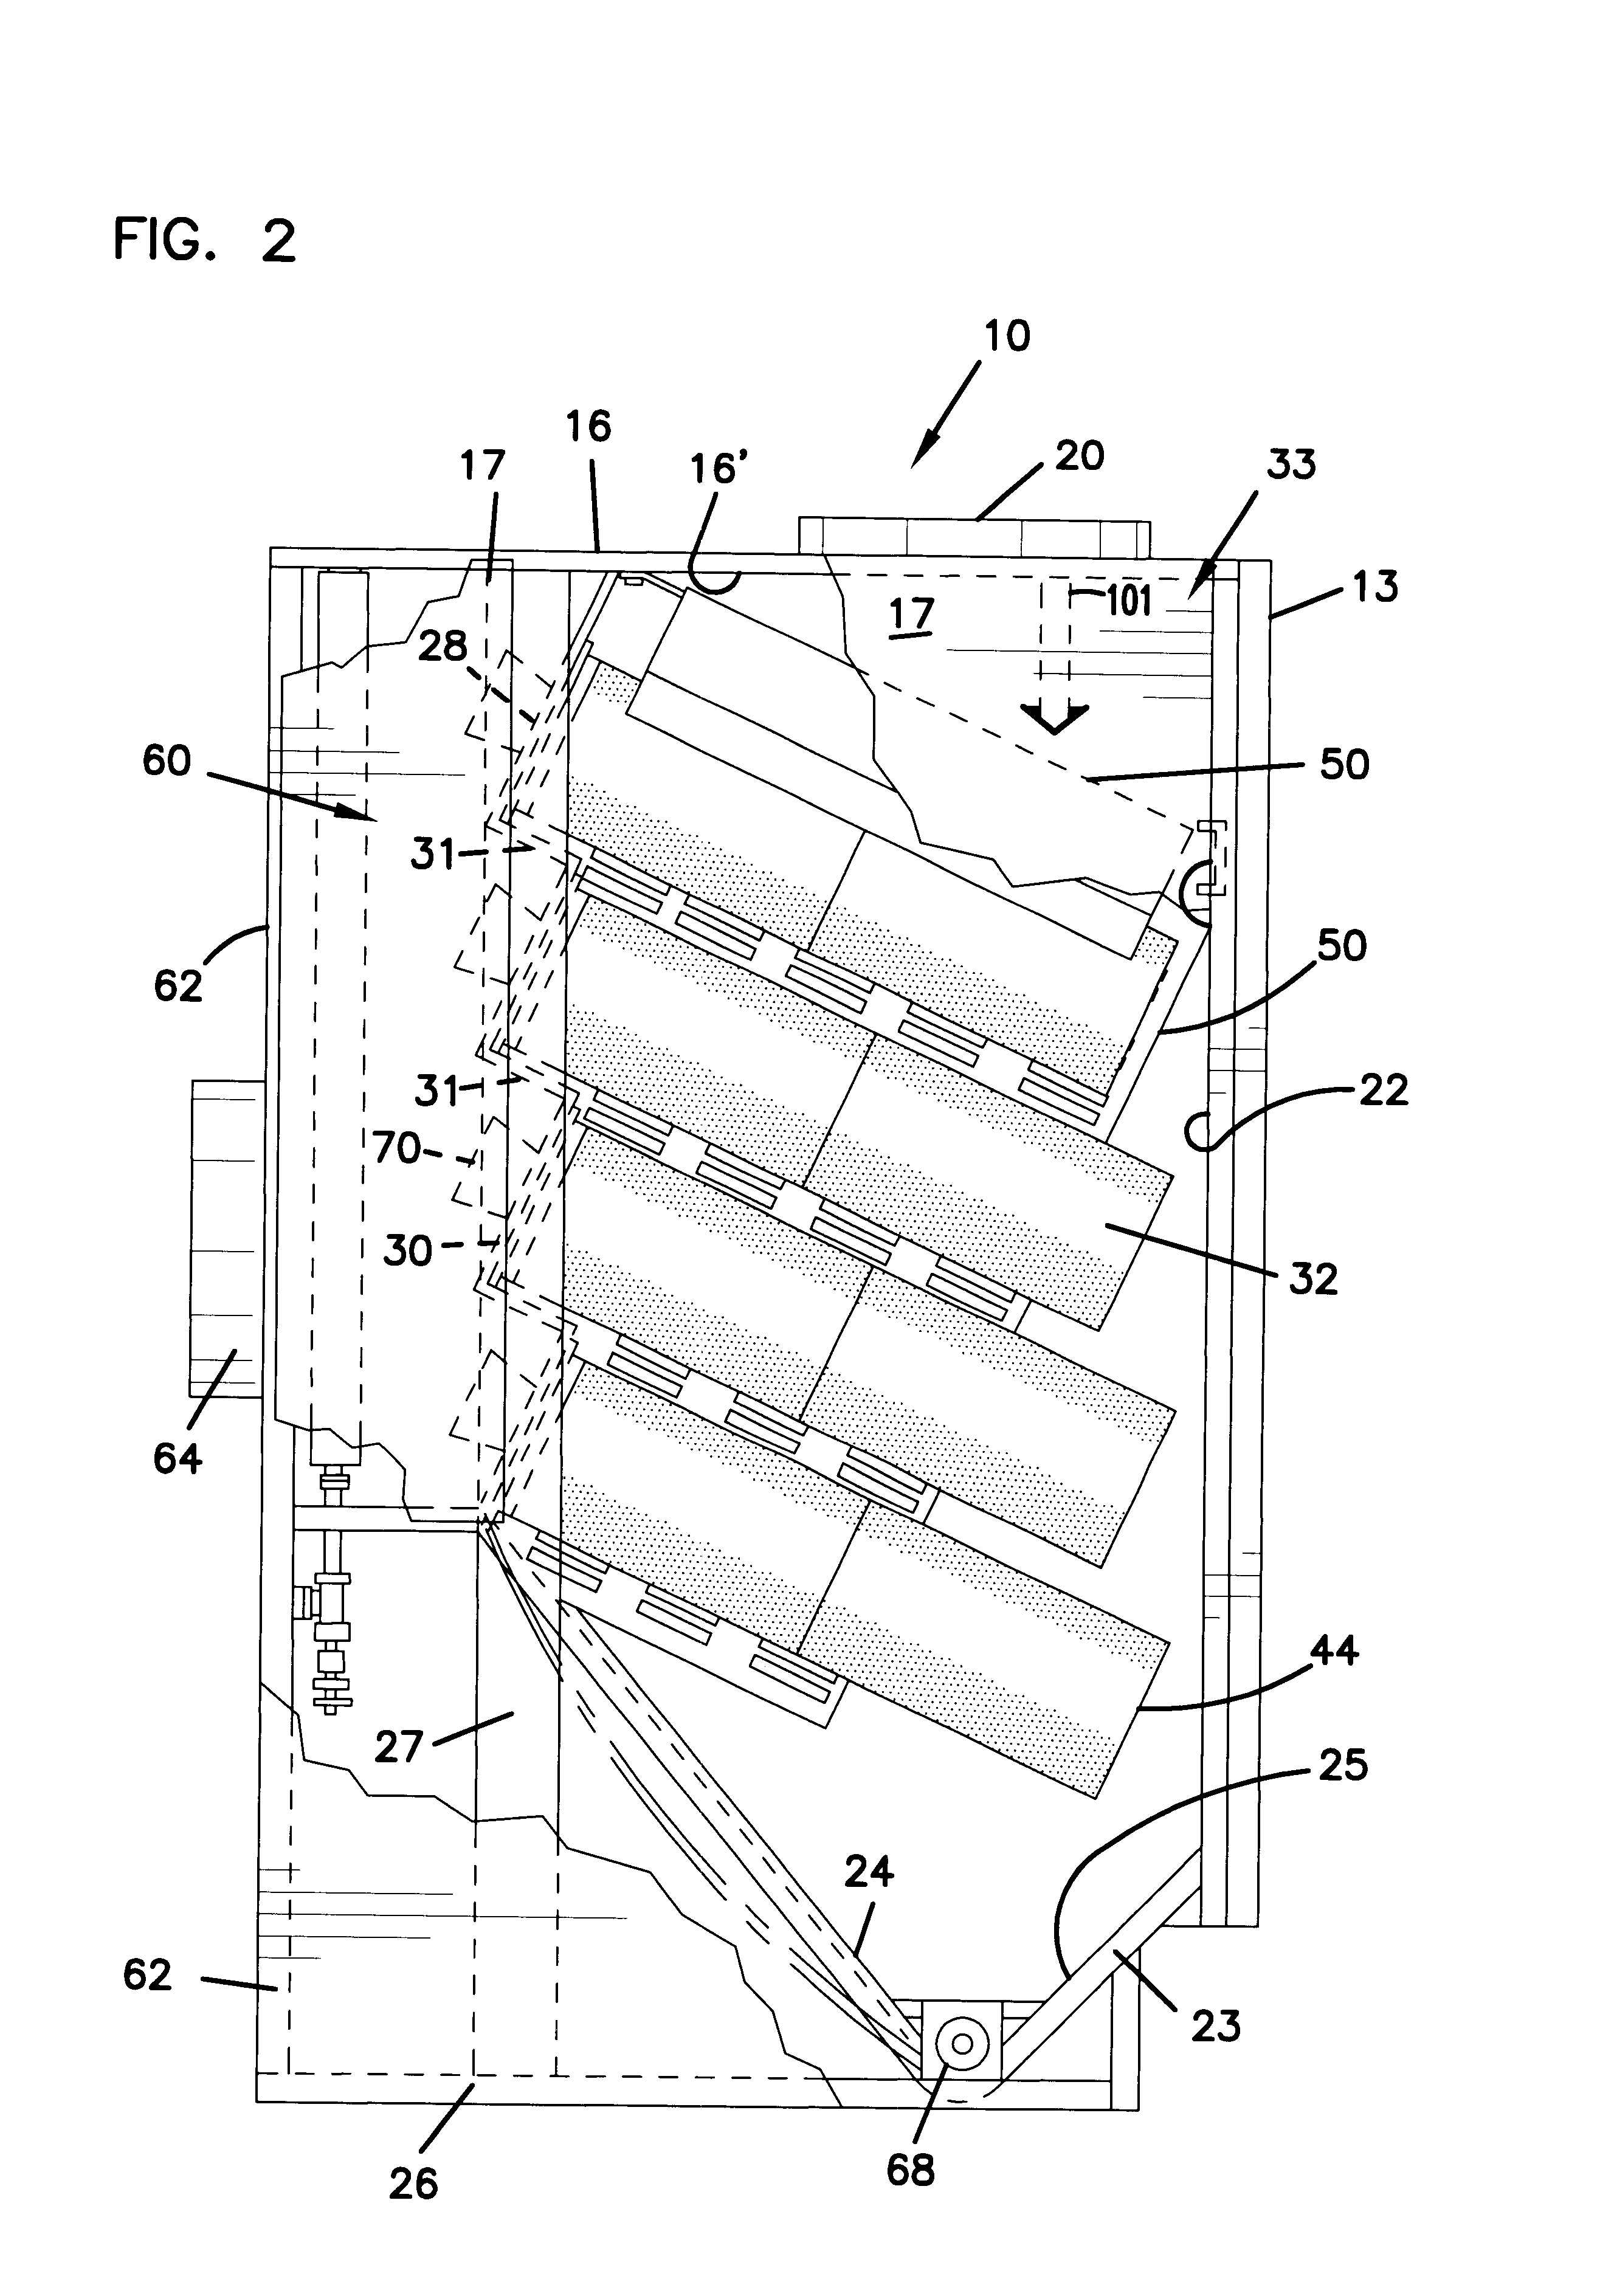 Air filter assembly having non-cylindrical filter elements, for filtering air with particulate matter